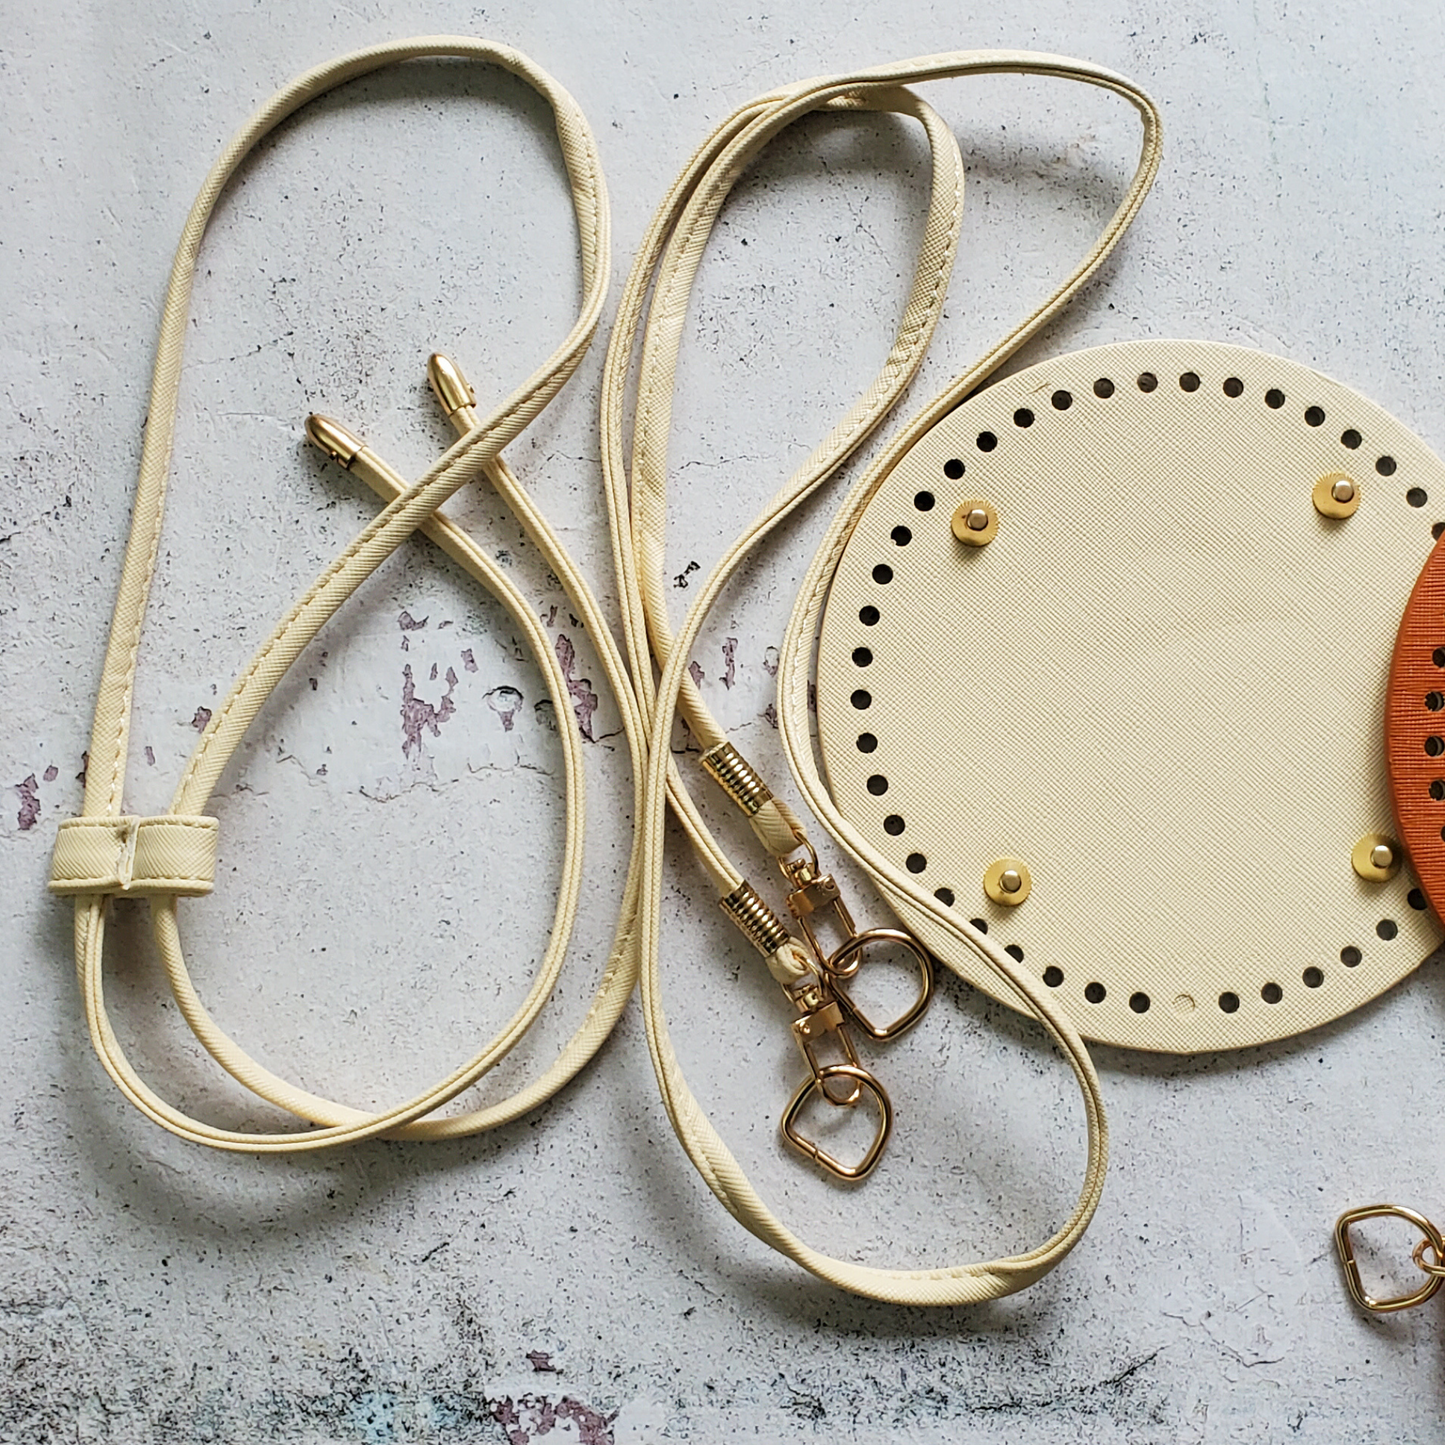 Round Leather Bottom with purse strap set for Crochet Bag Making